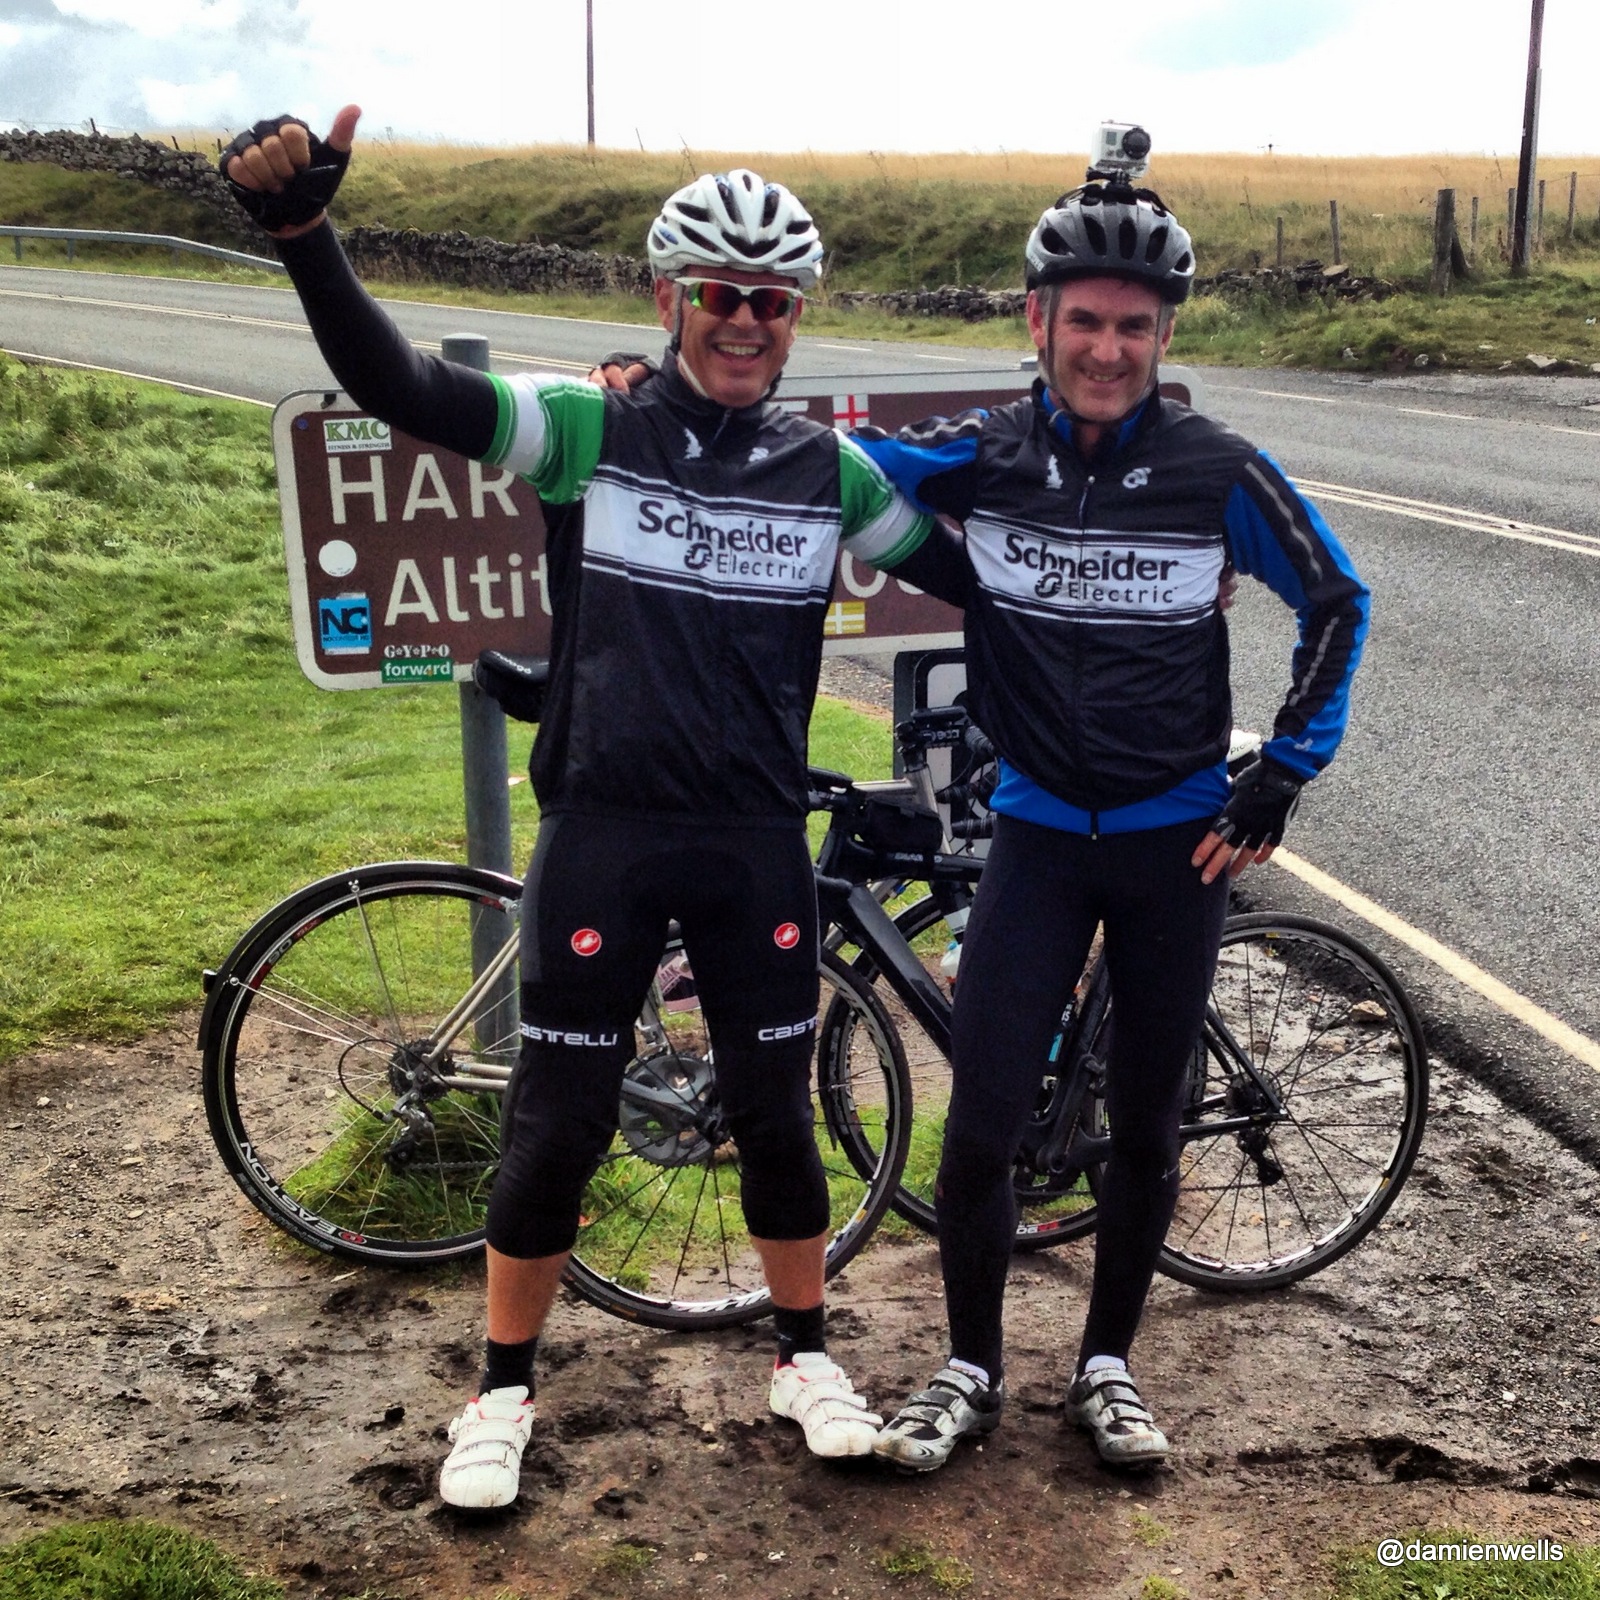 Damien and I having conquered Hartside